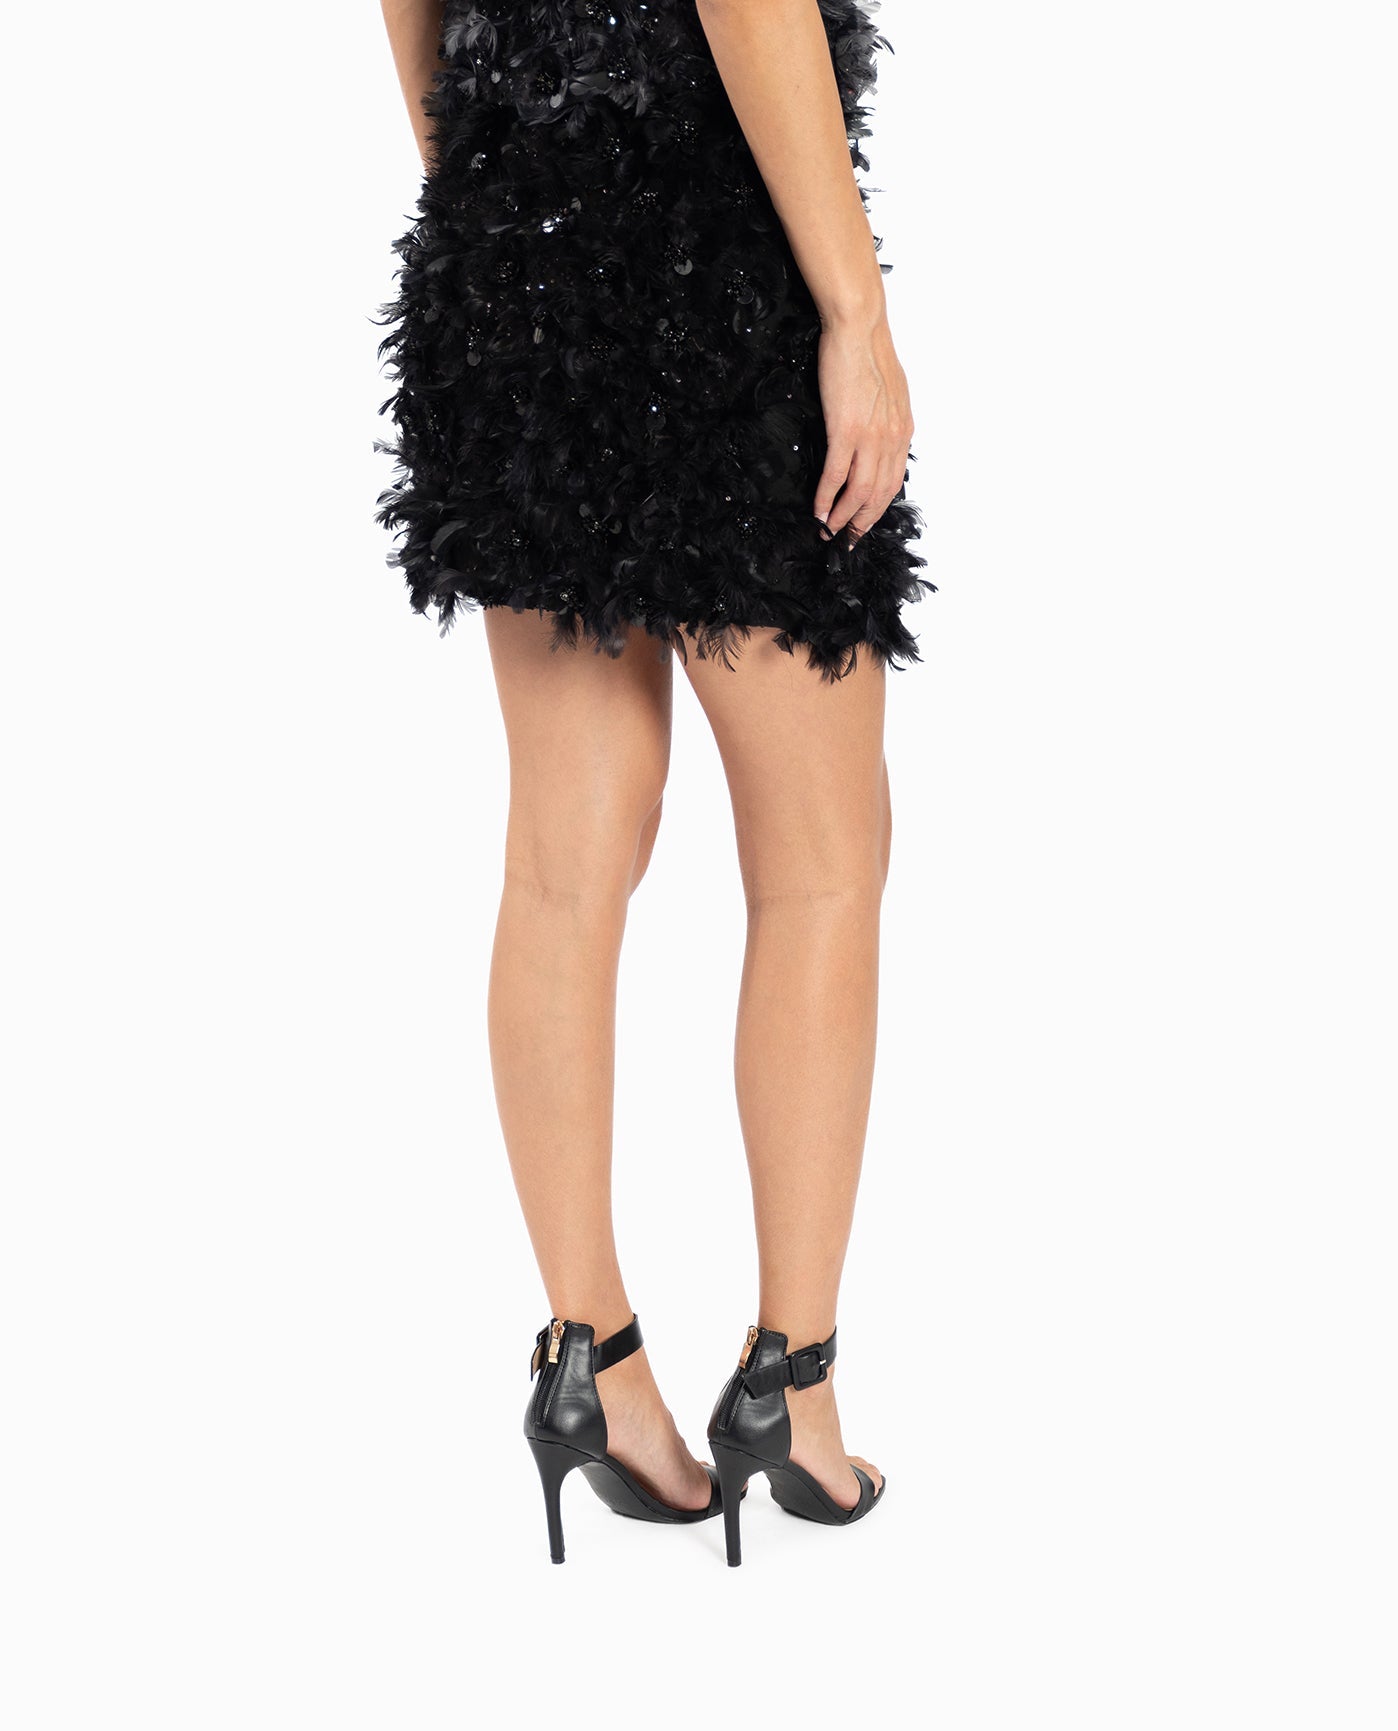 BACK OF FEATHERED FLORAL MINI SKIRT | Black Feather